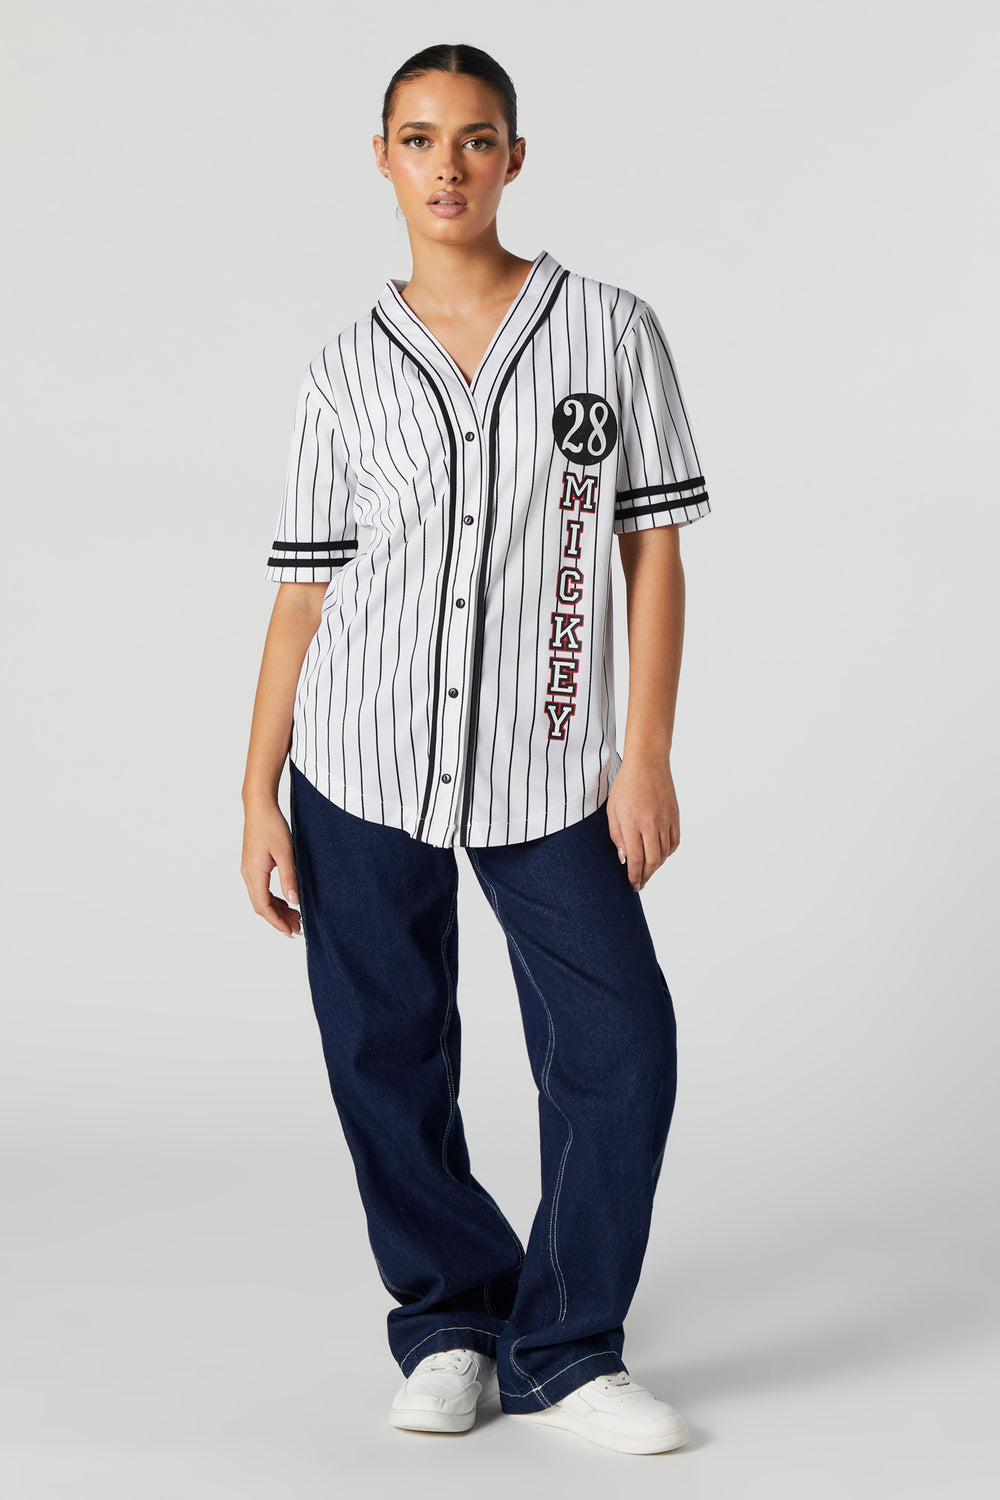 Pinstriped Mickey Mouse Graphic Baseball Jersey Pinstriped Mickey Mouse Graphic Baseball Jersey 3